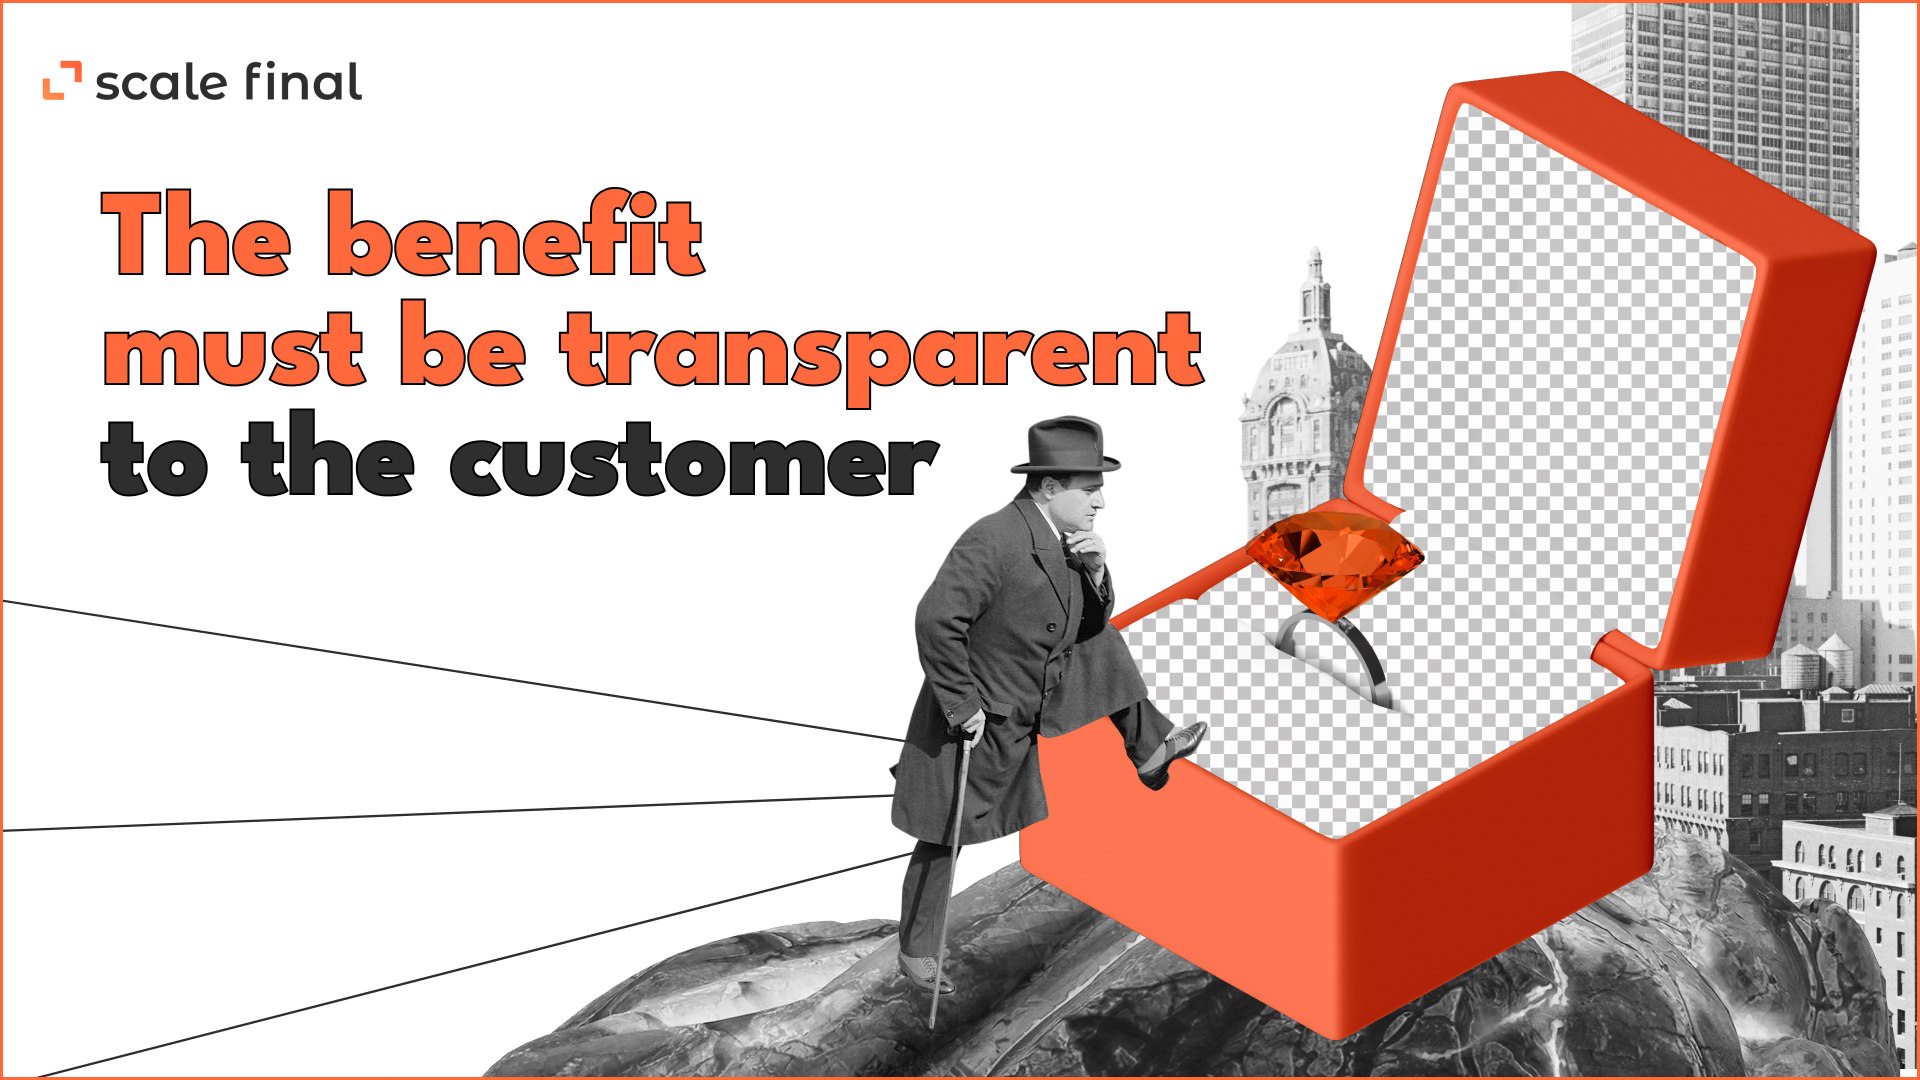 The benefit must be transparent to the customer